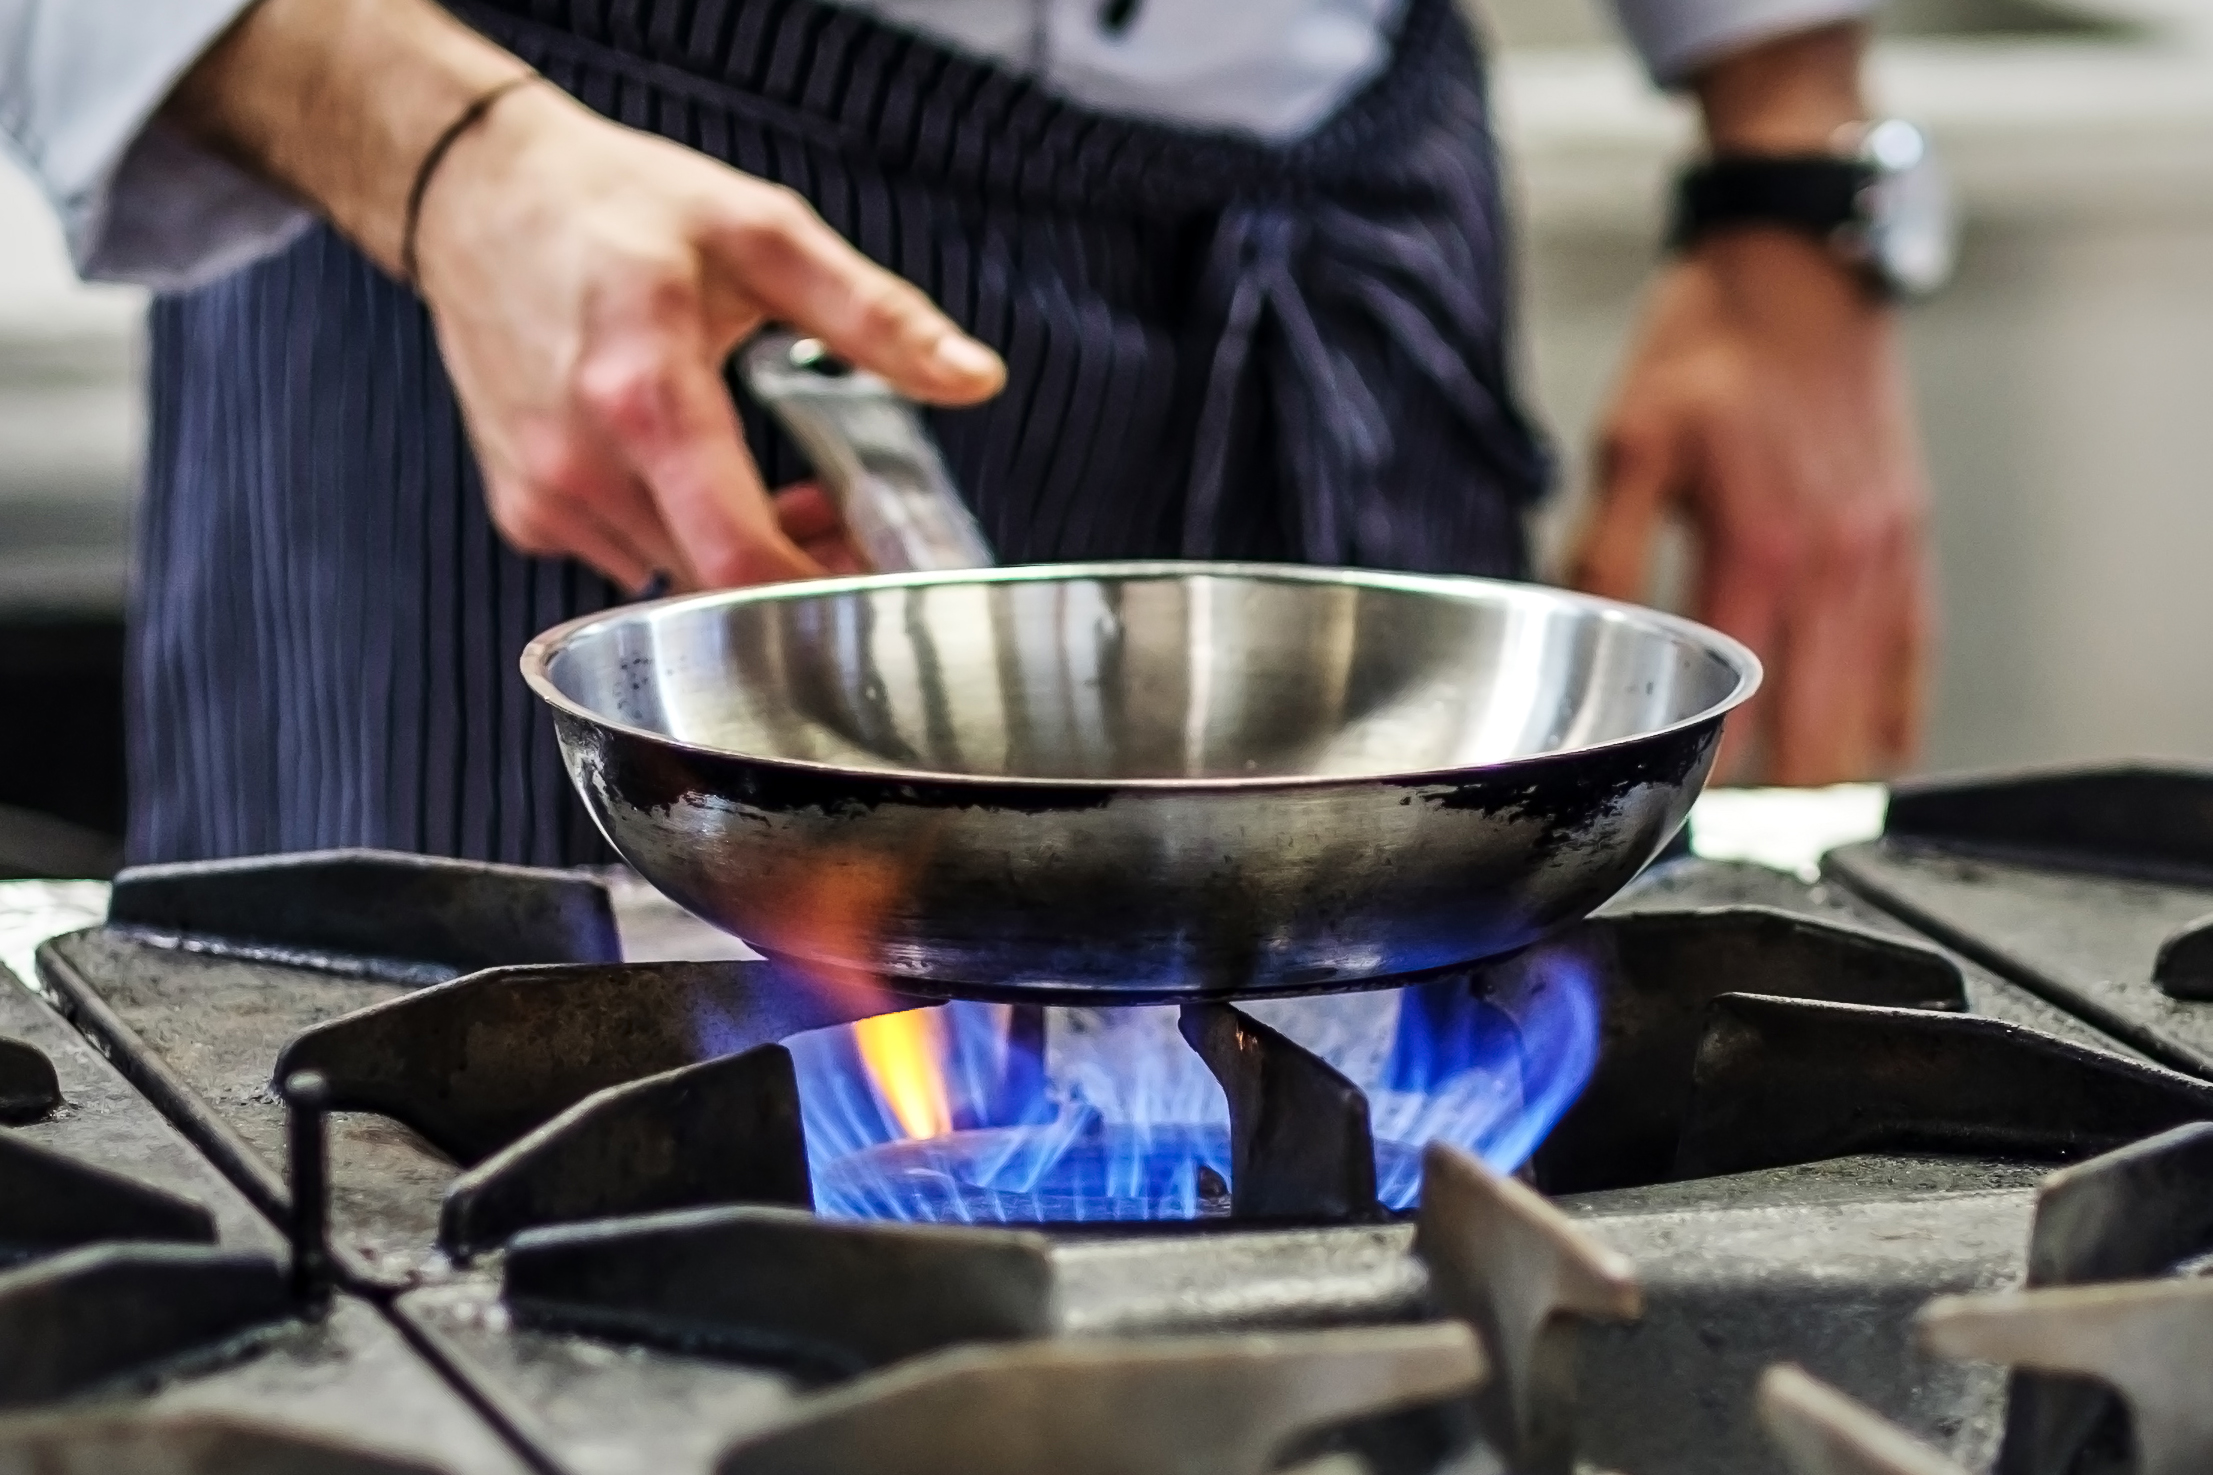 A chef holding a metal frying pan over a gas burner on an industrial stove.